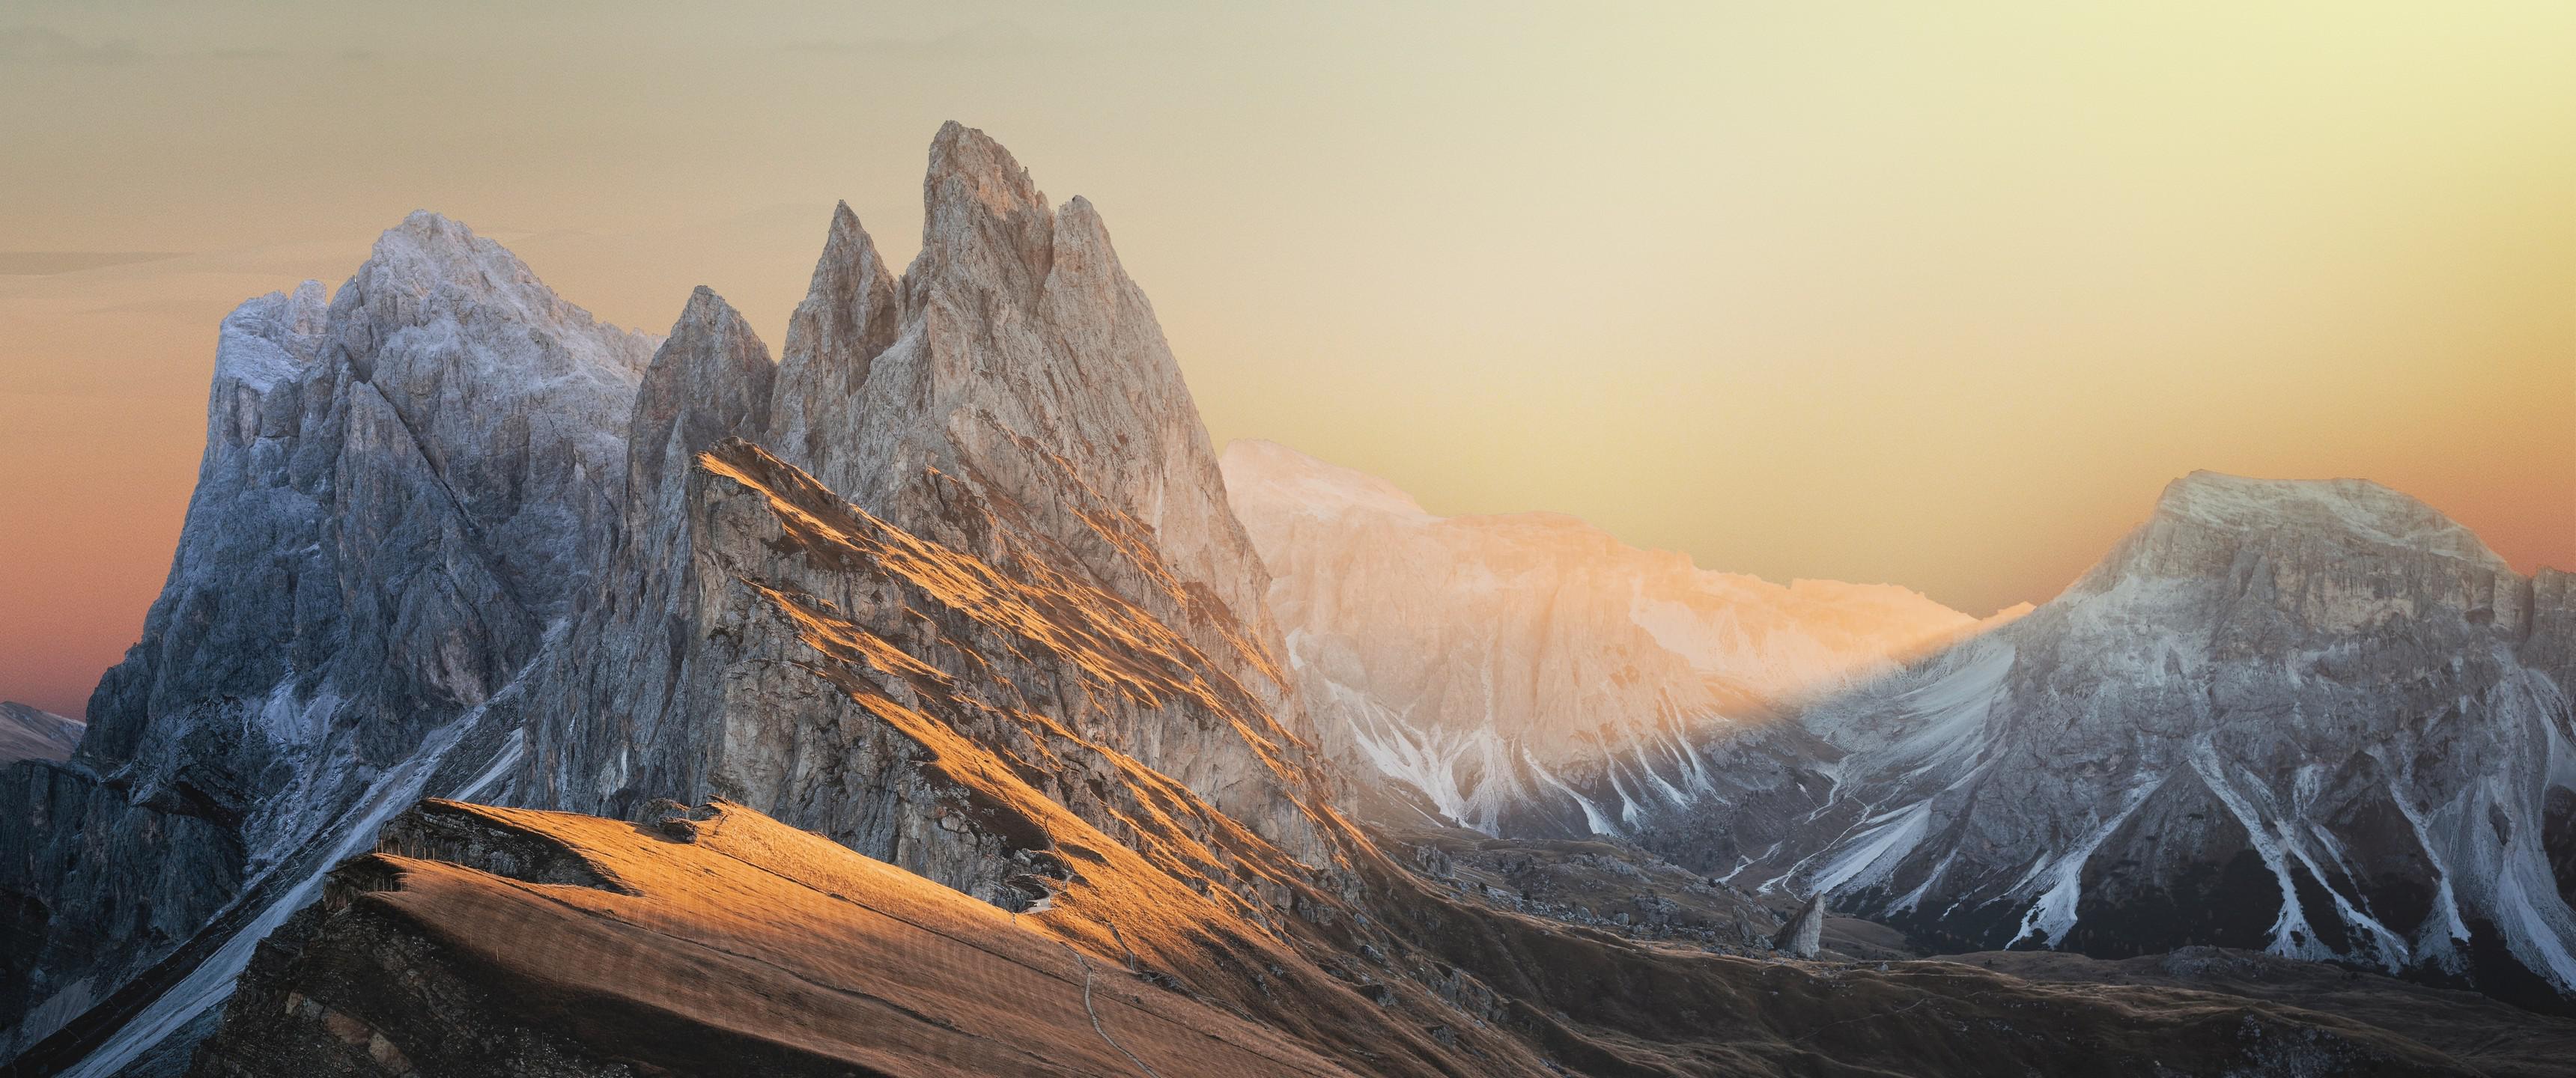 General 3440x1440 South Tyrol Italy mountains sunrise sunset sunset glow